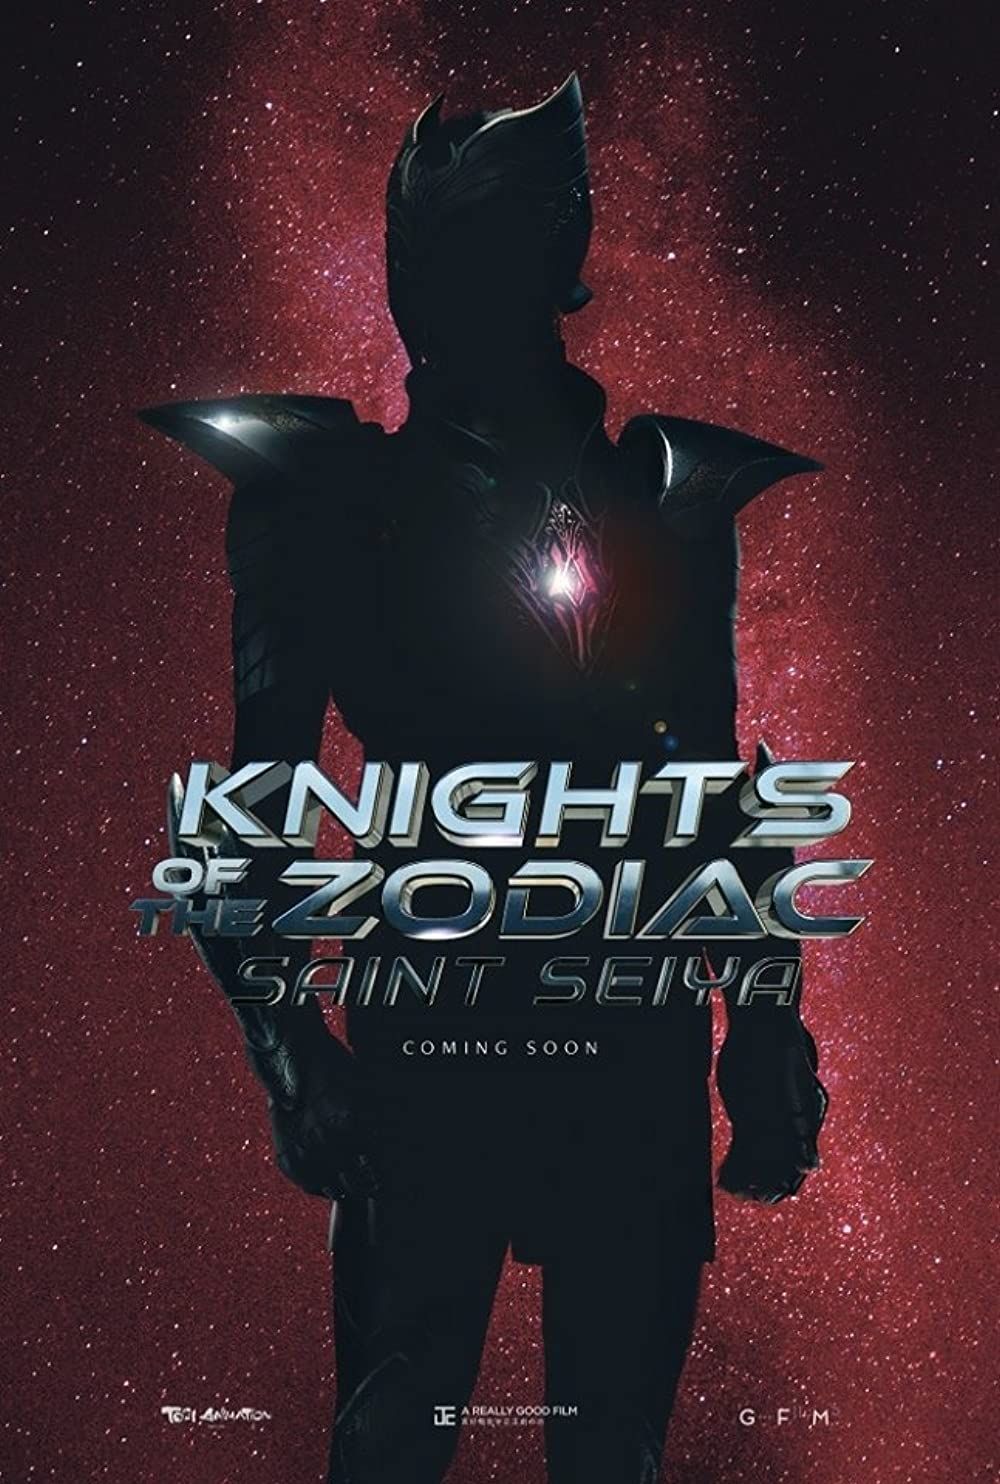 knights-of-the-zodiac-movie-poster